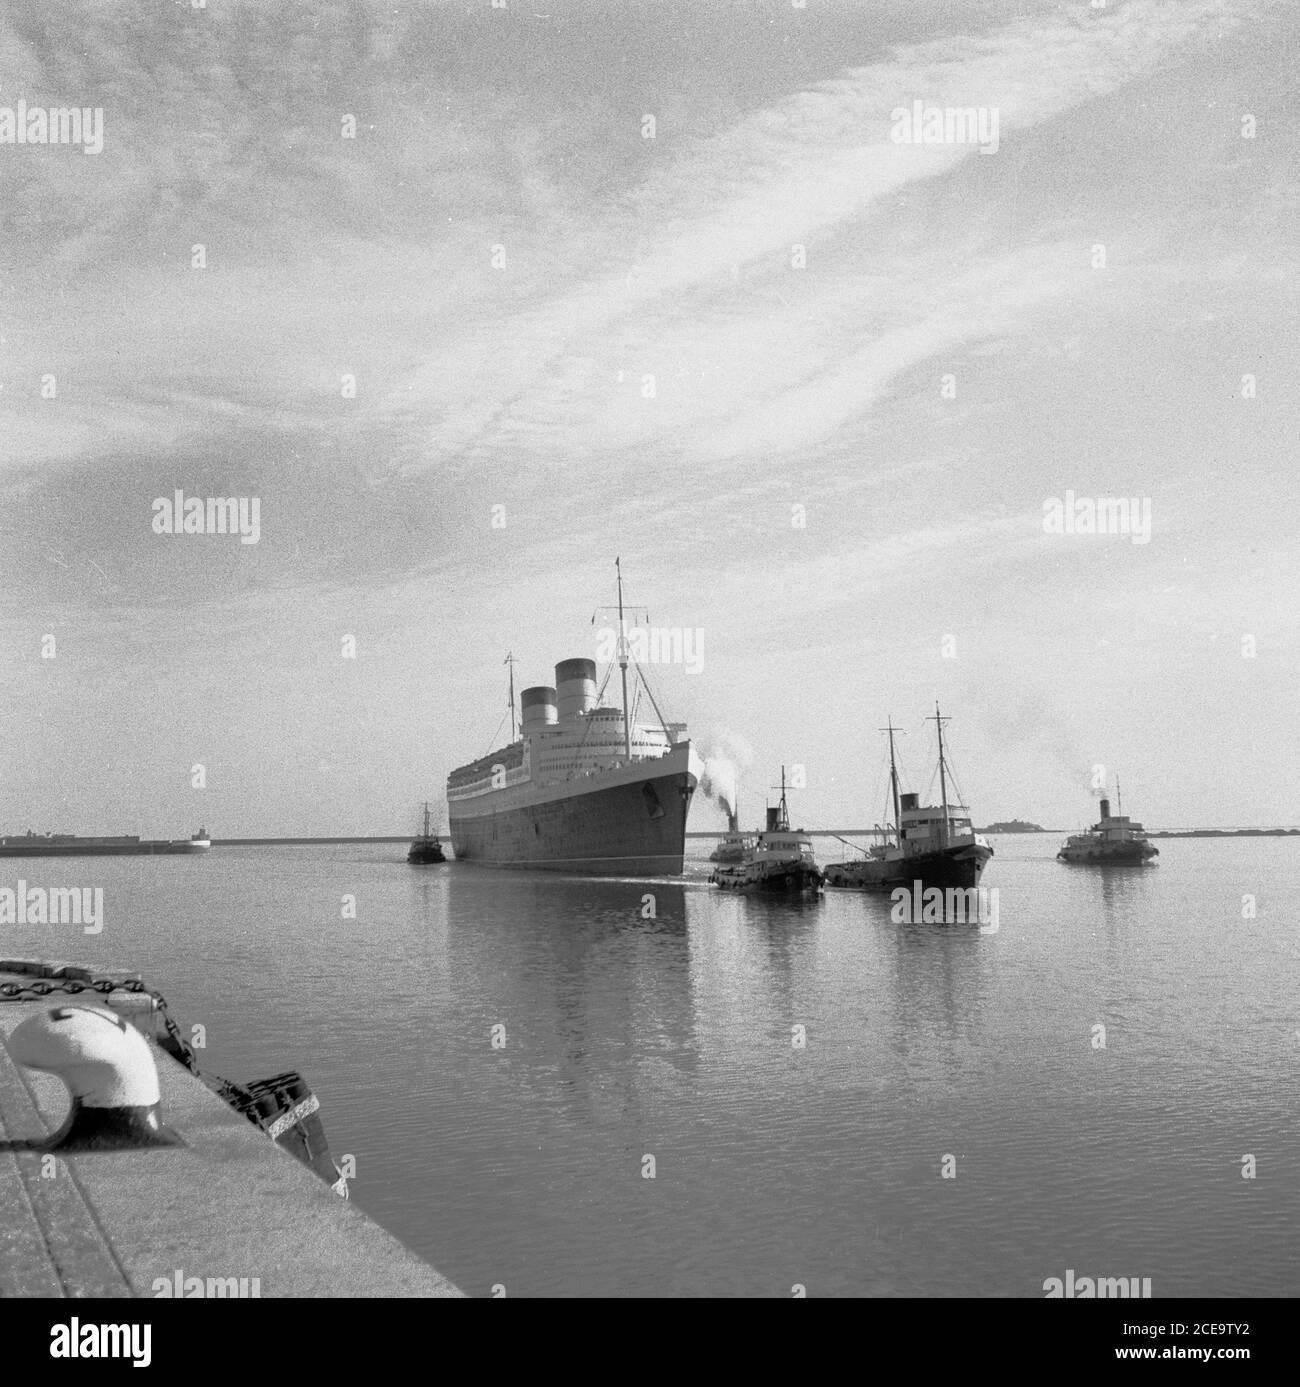 1950s, historical, tugboats pull the RMS Queen Elizabeth ocean liner into the calm waters of the French port of Cherbourg. Named after the British Queen Mother, it was the largest passenger liner ever built at that time (1938) and remained so for 56 years thereafter. She was used as a wartime troopship during WW2 and only became an ocean liner, as intended, in 1946. From then on, this luxury liner provided a weekly service between Southampton, UK and New York city in the USA, via Cherbourg, France.  In 1972  in Victoria Harbour, Hong Kong, while undergoing a refit, she caught fire and sank. Stock Photo